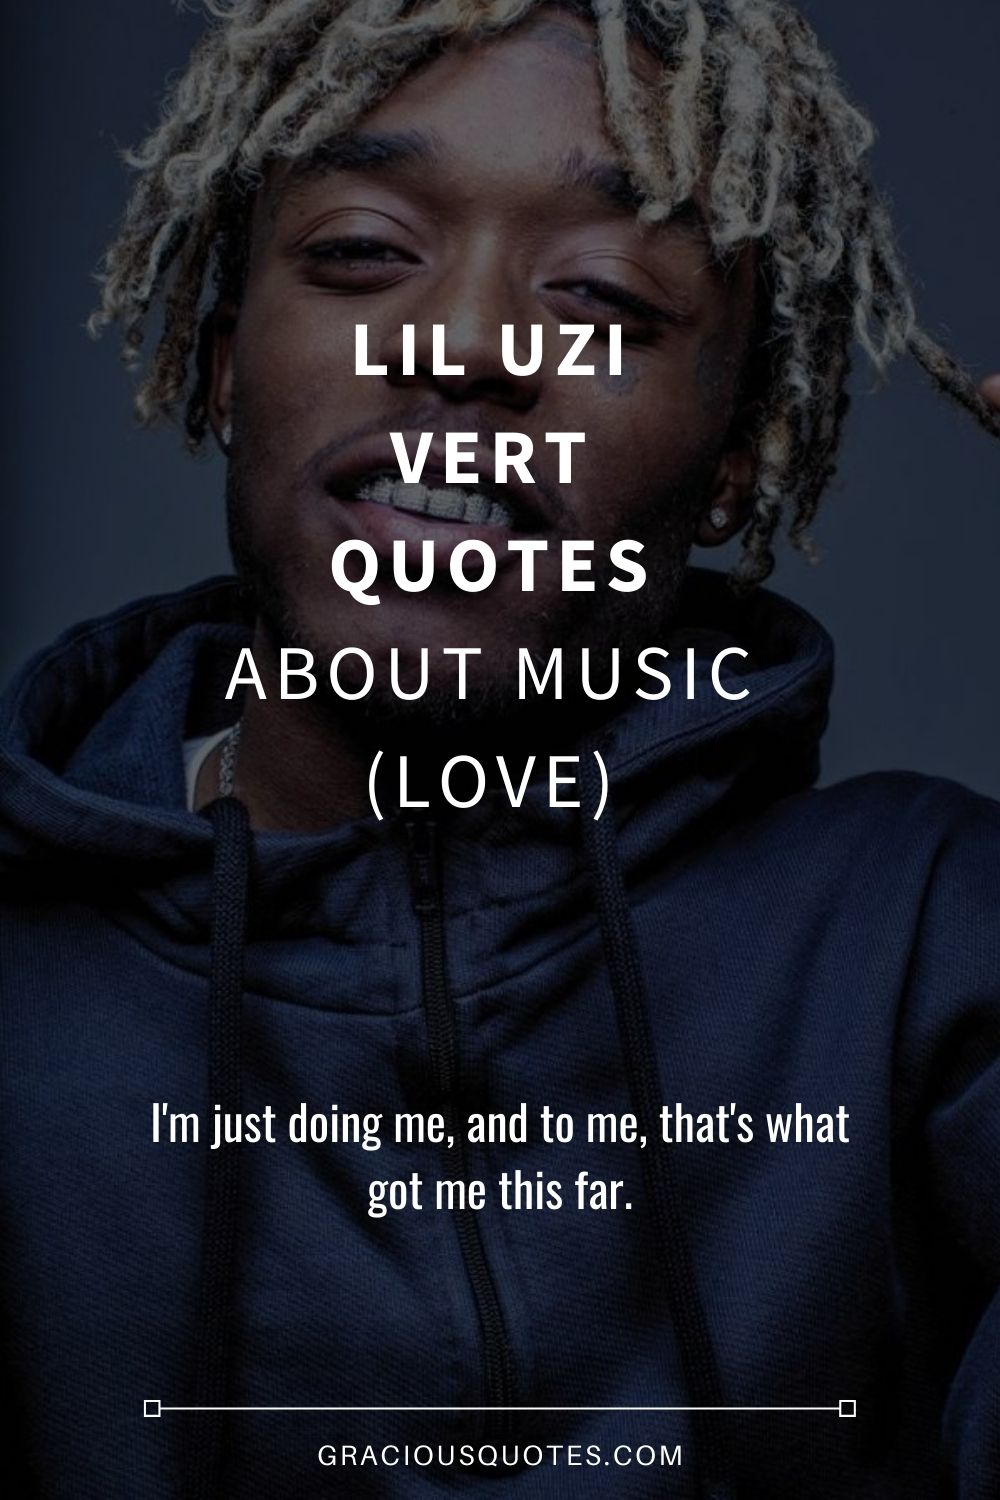 Lil Uzi Vert Quotes About Music (LOVE) - Gracious Quotes